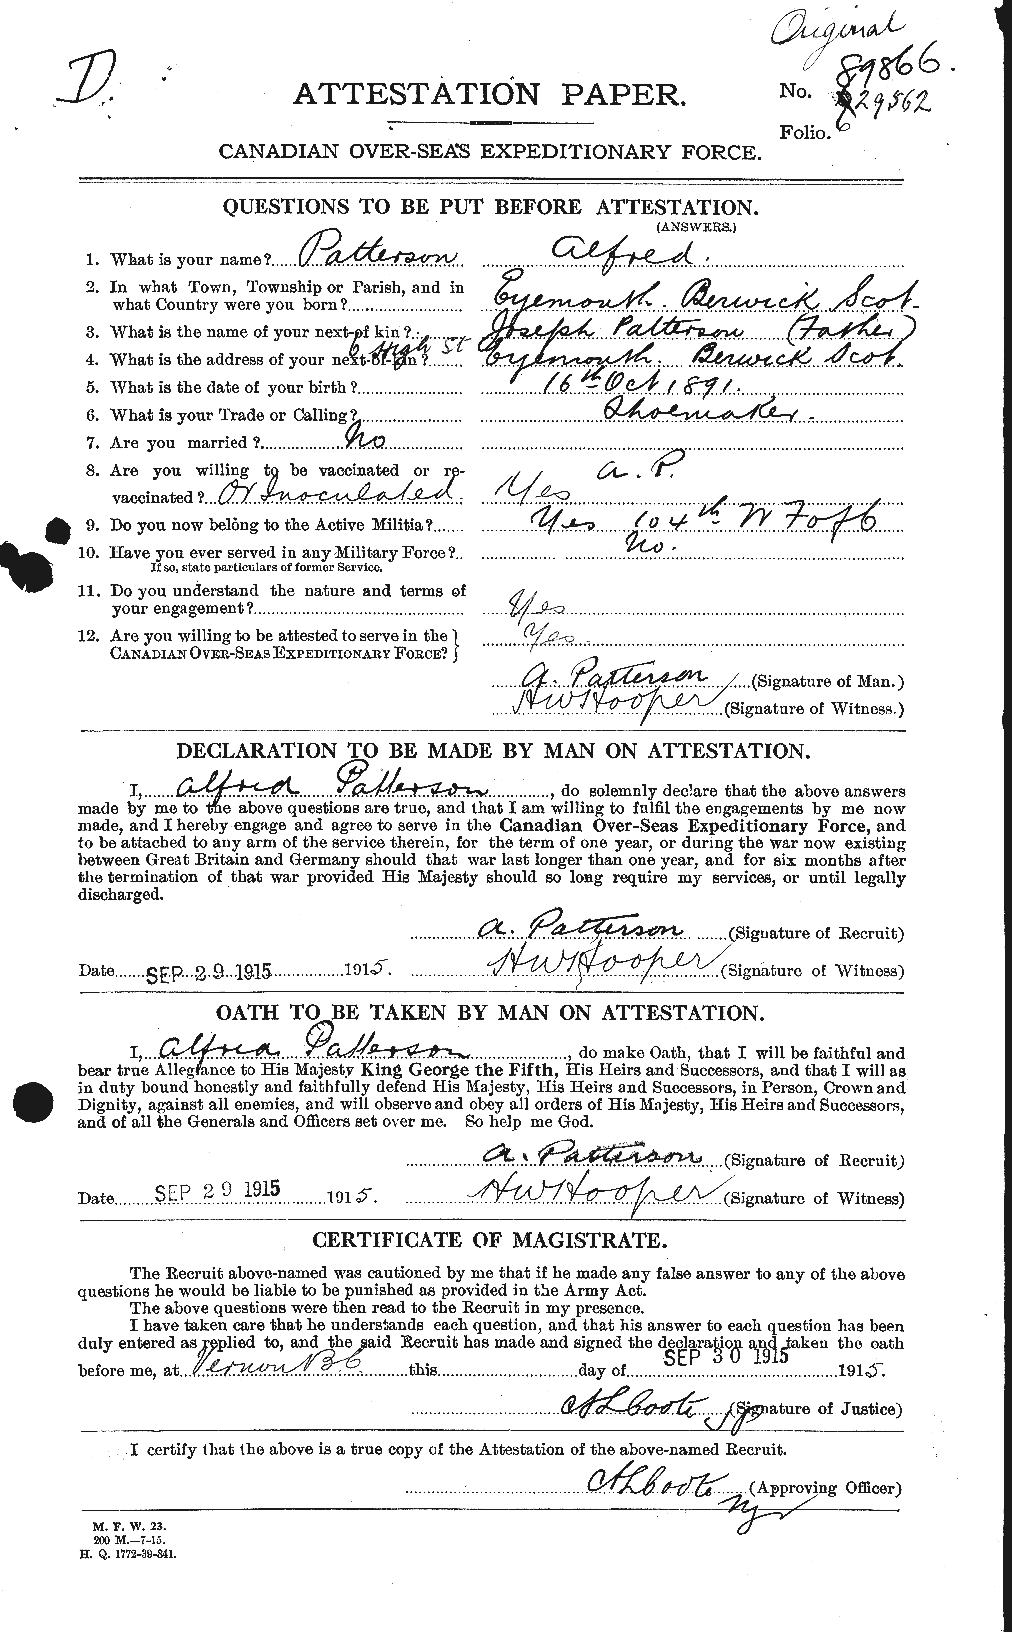 Personnel Records of the First World War - CEF 568215a